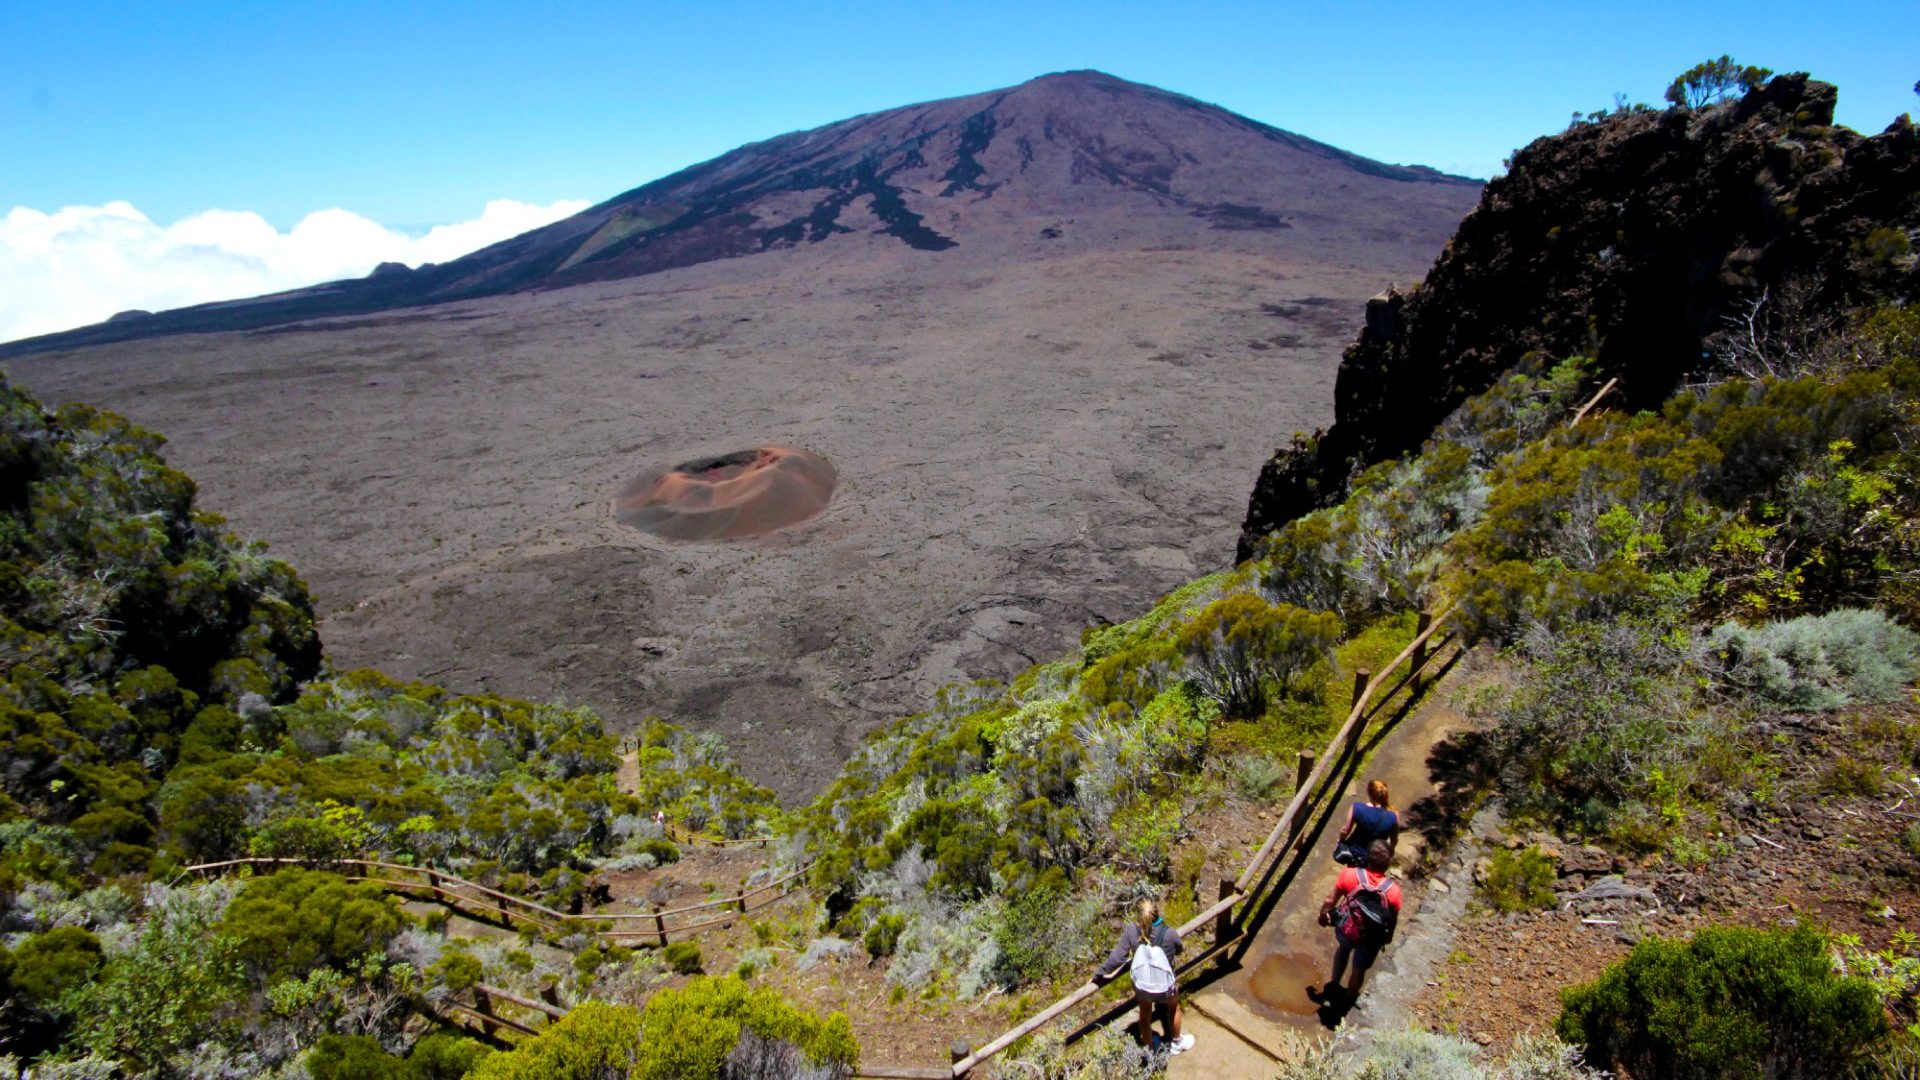 Hikers at the Reunion island volcano